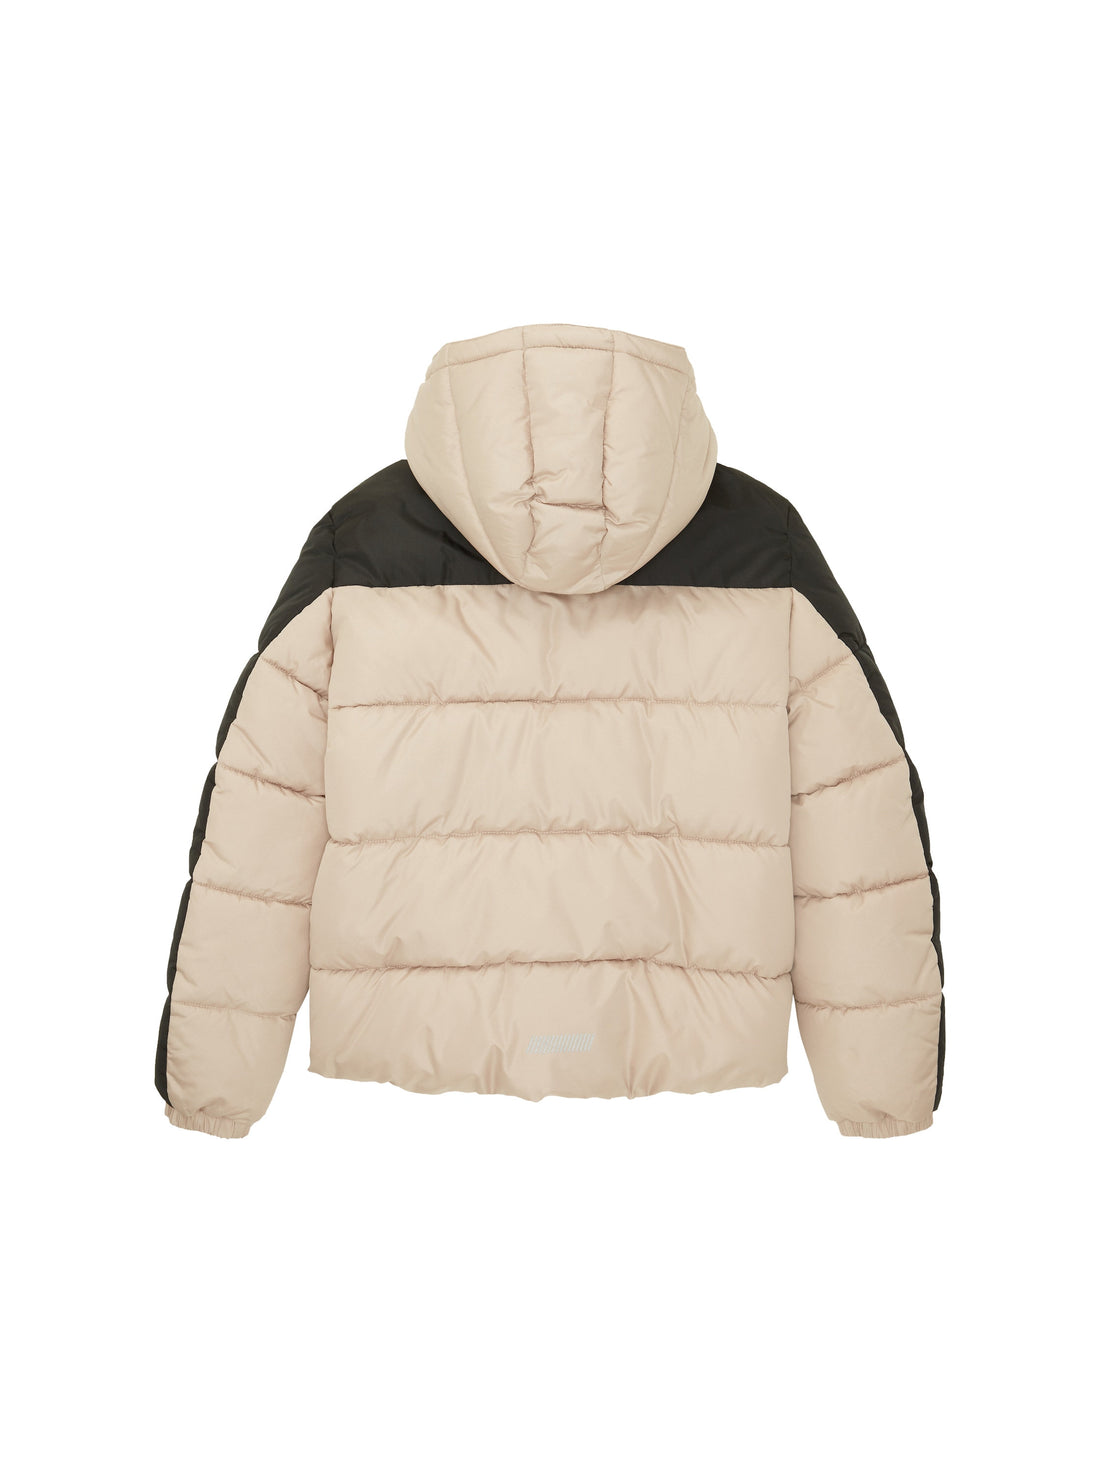 Heavy Puffer Jacket With Hood_1038540_12628_02